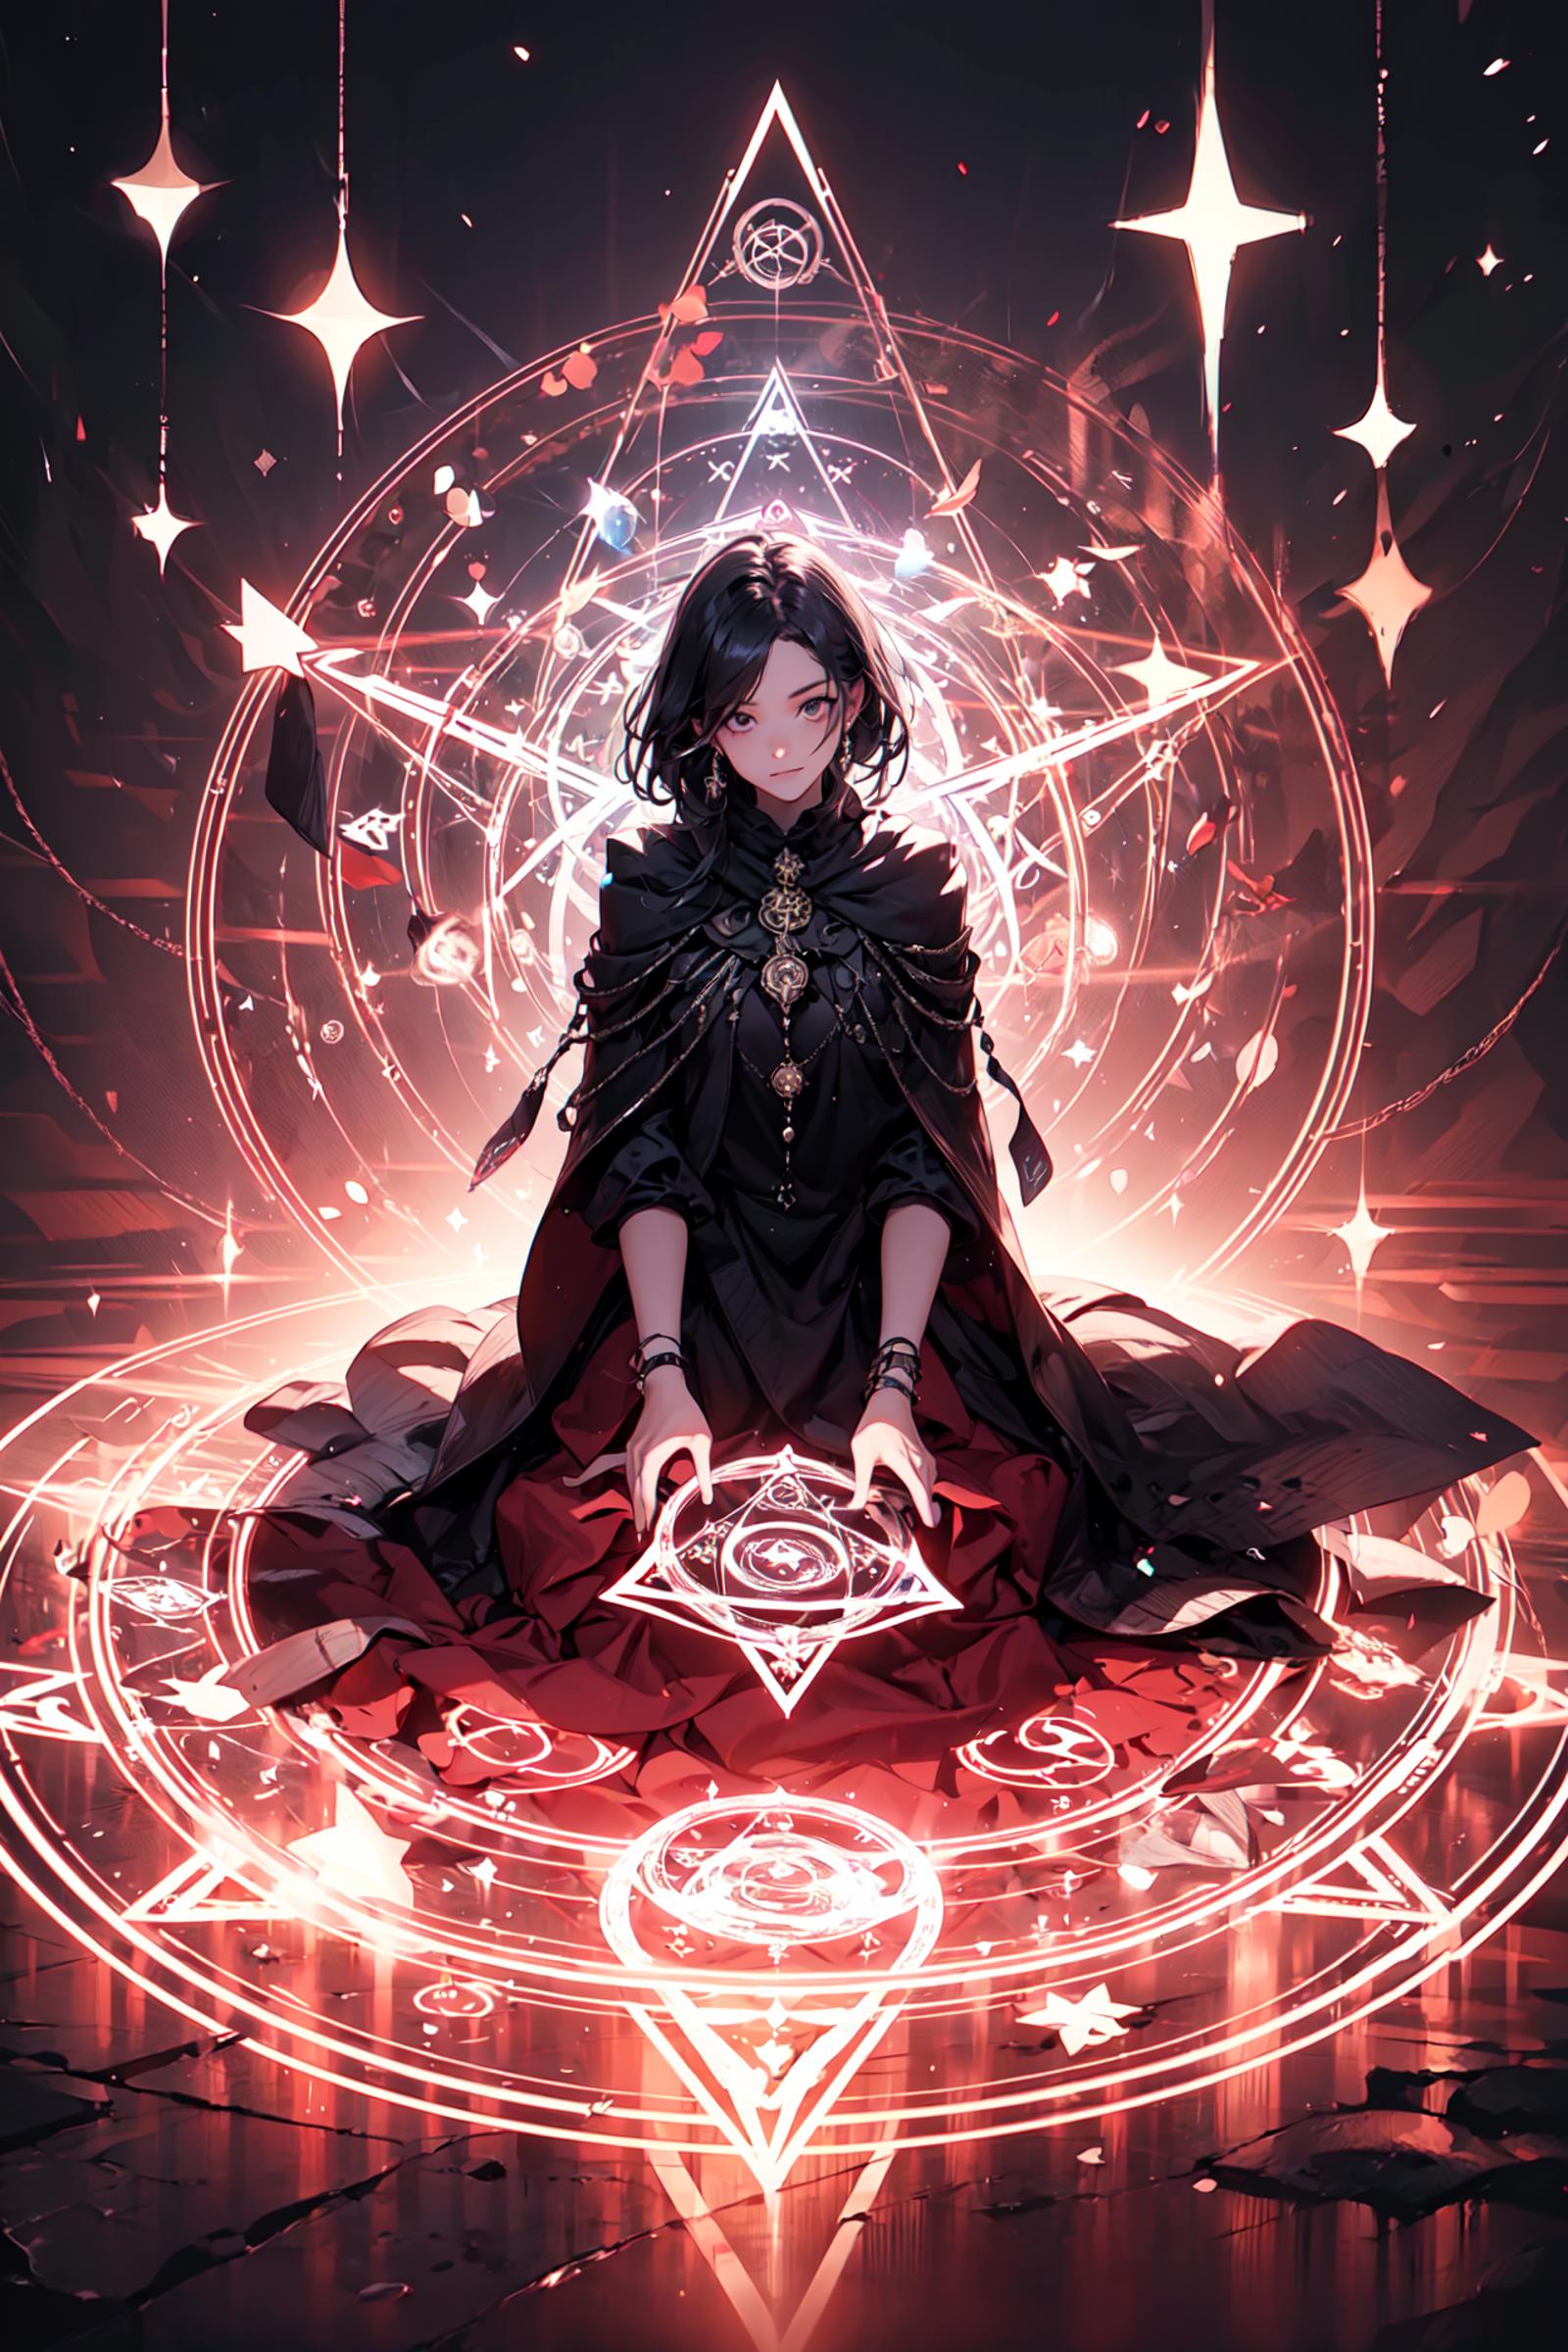 A woman with a black dress and red skirt sitting in the middle of a circle of stars, possibly a witch or a mage.